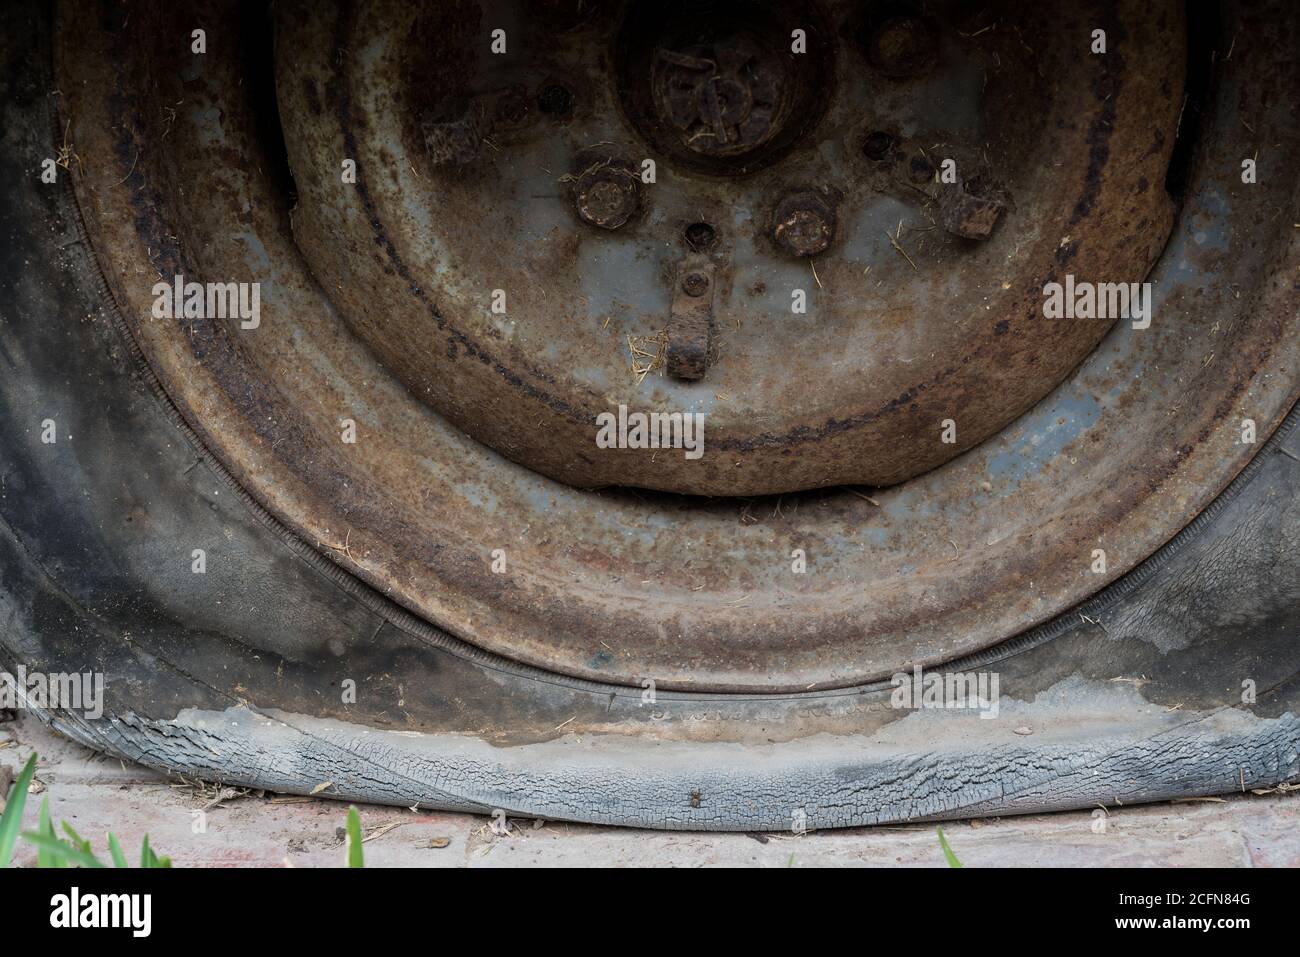 Close up of an abandoned car, rusting wheel with a flat tyre. Stock Photo